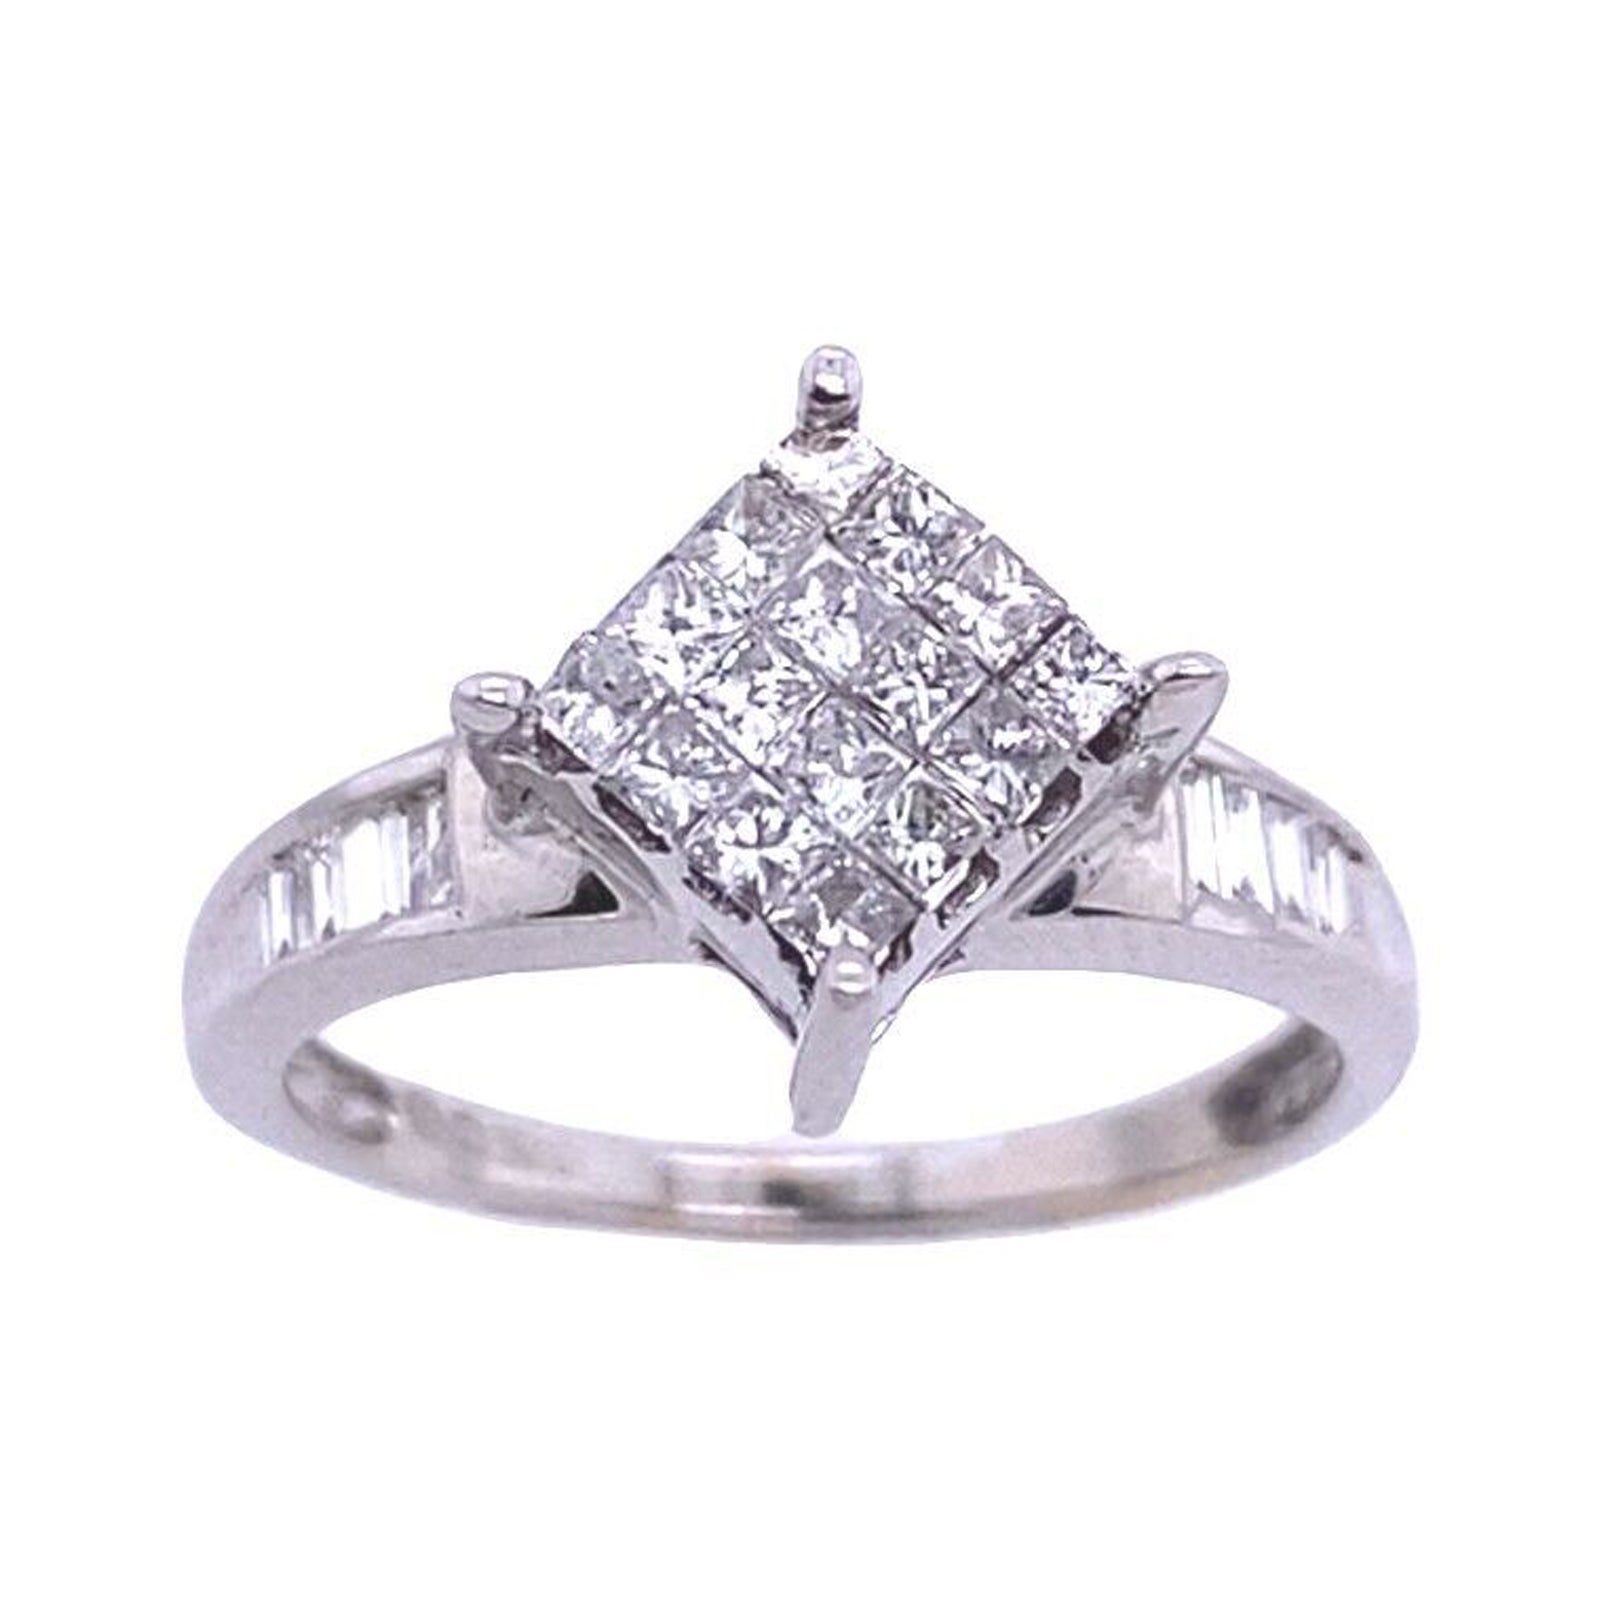 0.25ct Princess Cut Diamond Ring in 9ct White Gold For Sale at 1stDibs